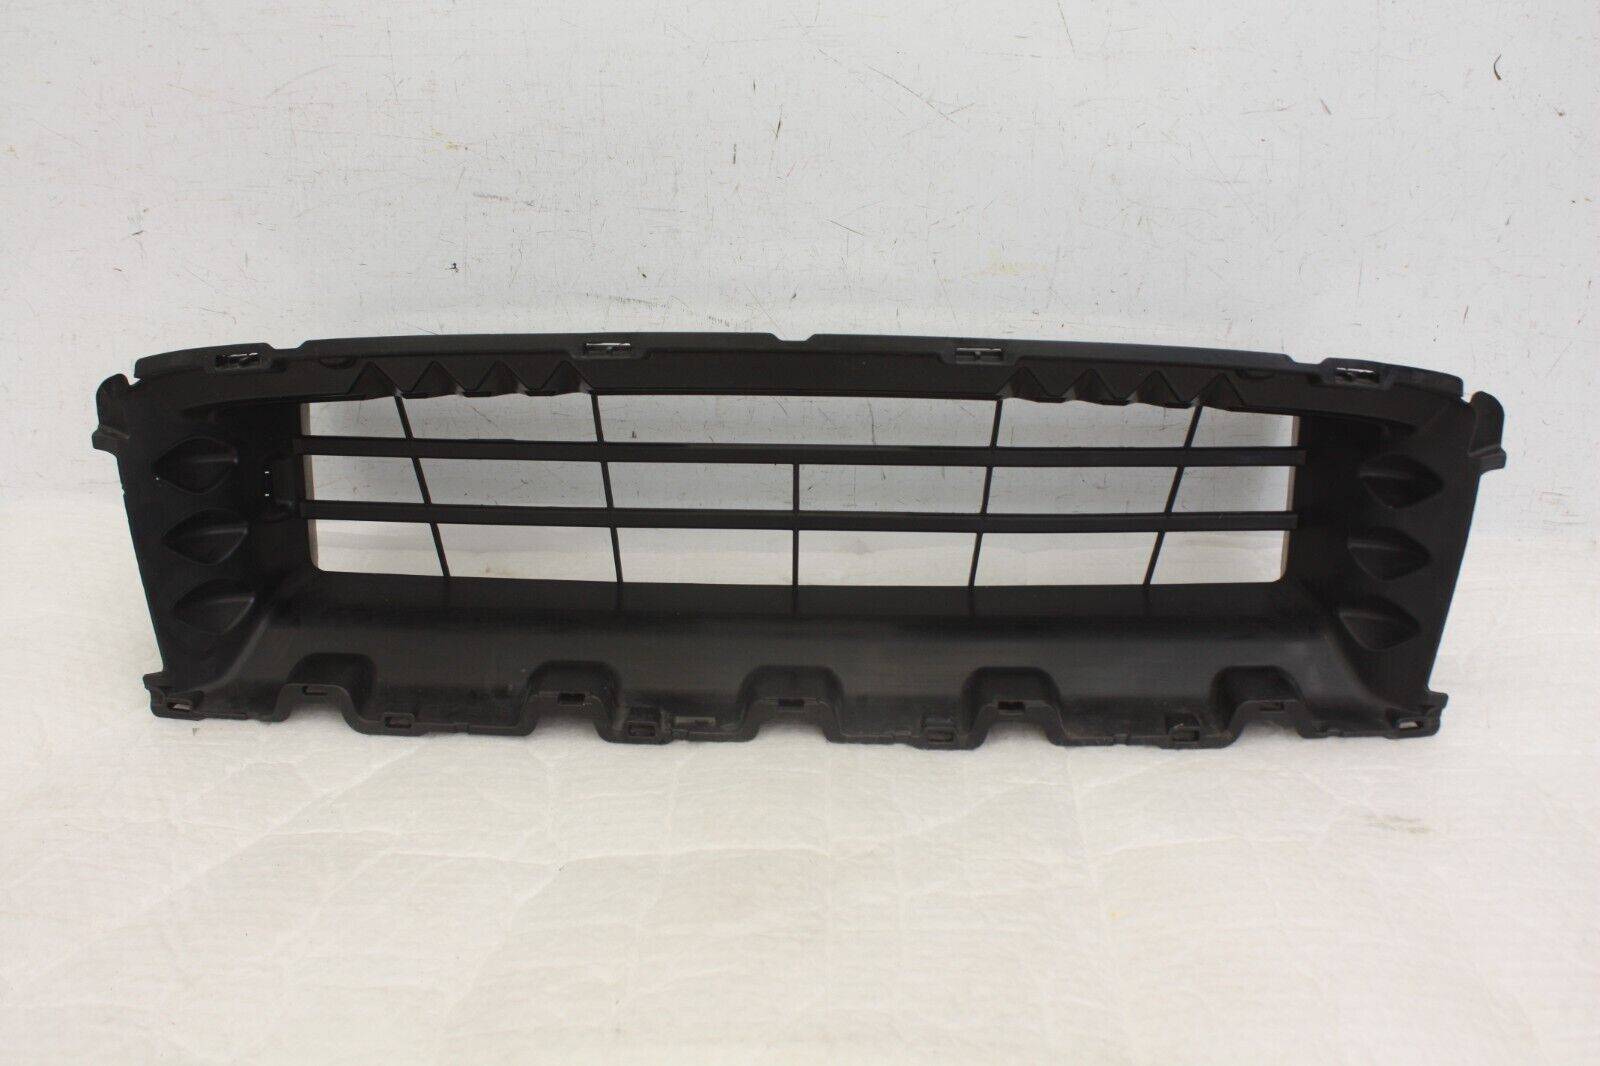 Ford Galaxy Mondeo Steering Wheel Weather Grill LM2B 8312 AC Genuine 176340050681